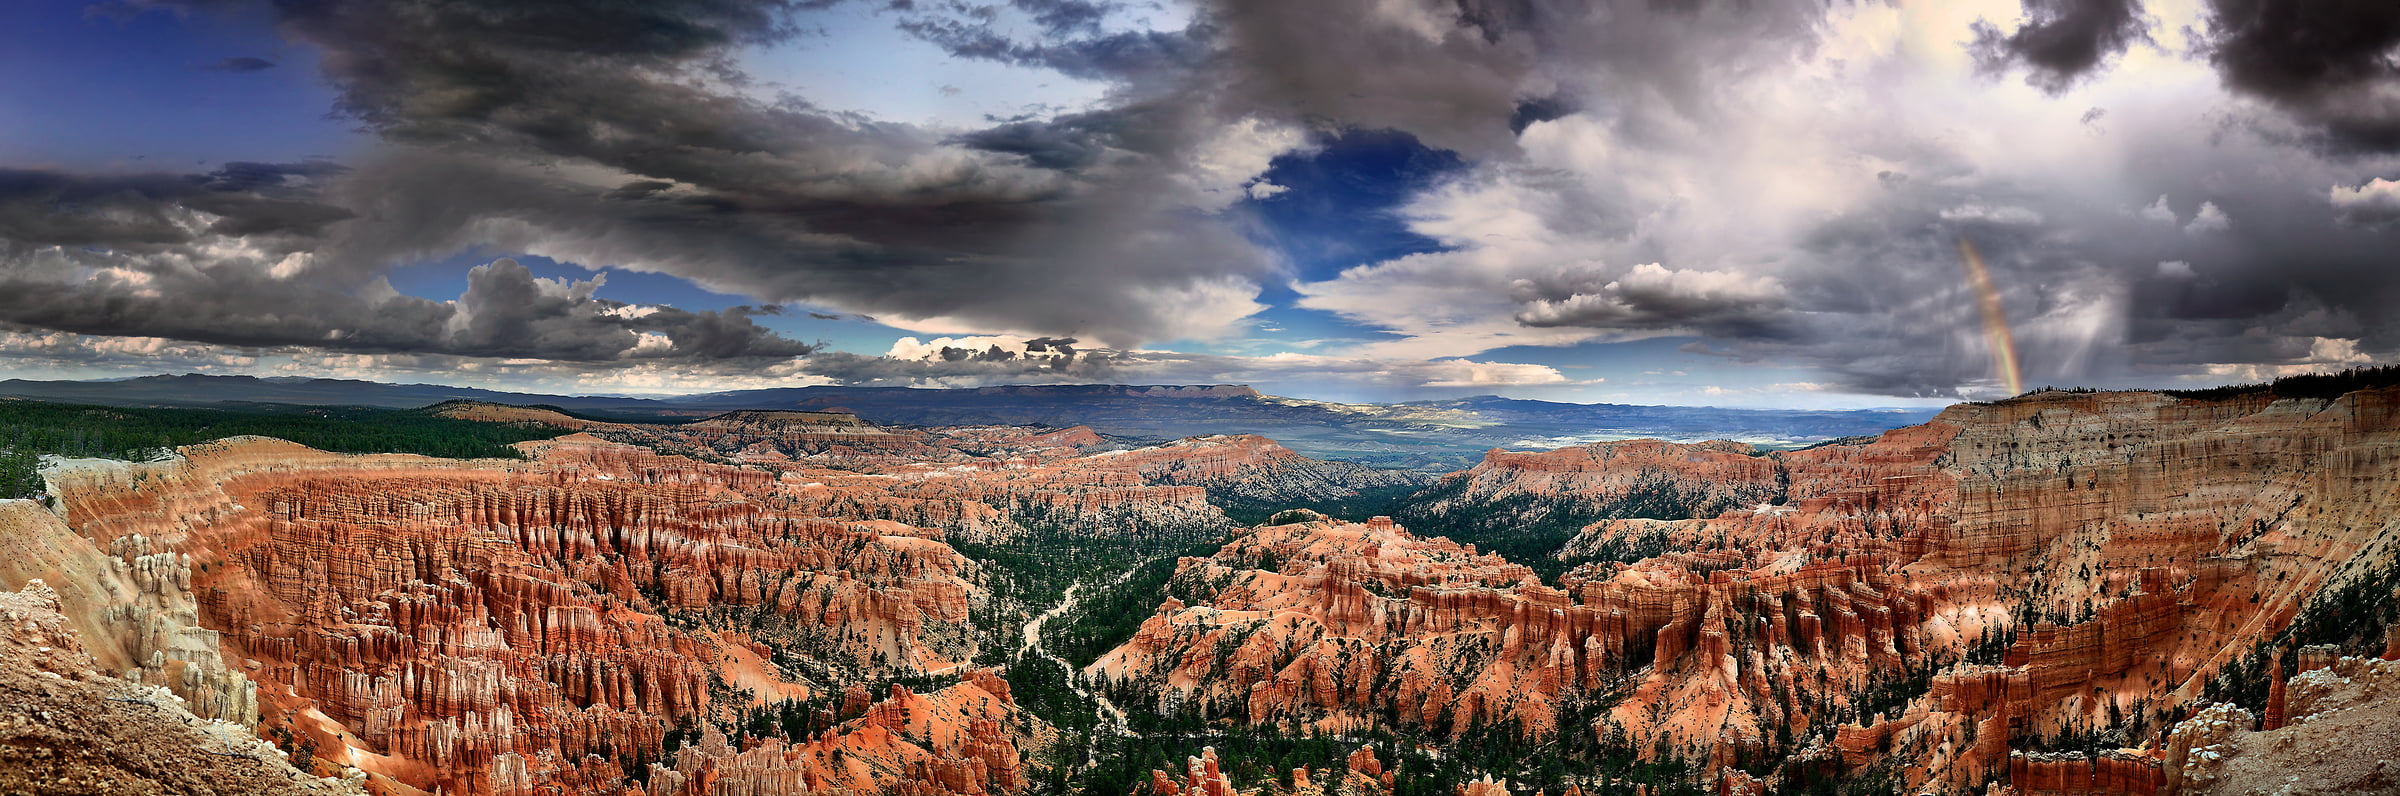 402 megapixels! A very high resolution panorama landscape photo of Bryce Canyon National Park with a rainbow; VAST photo created by Phil Crawshay in Bryce Canyon, Utah